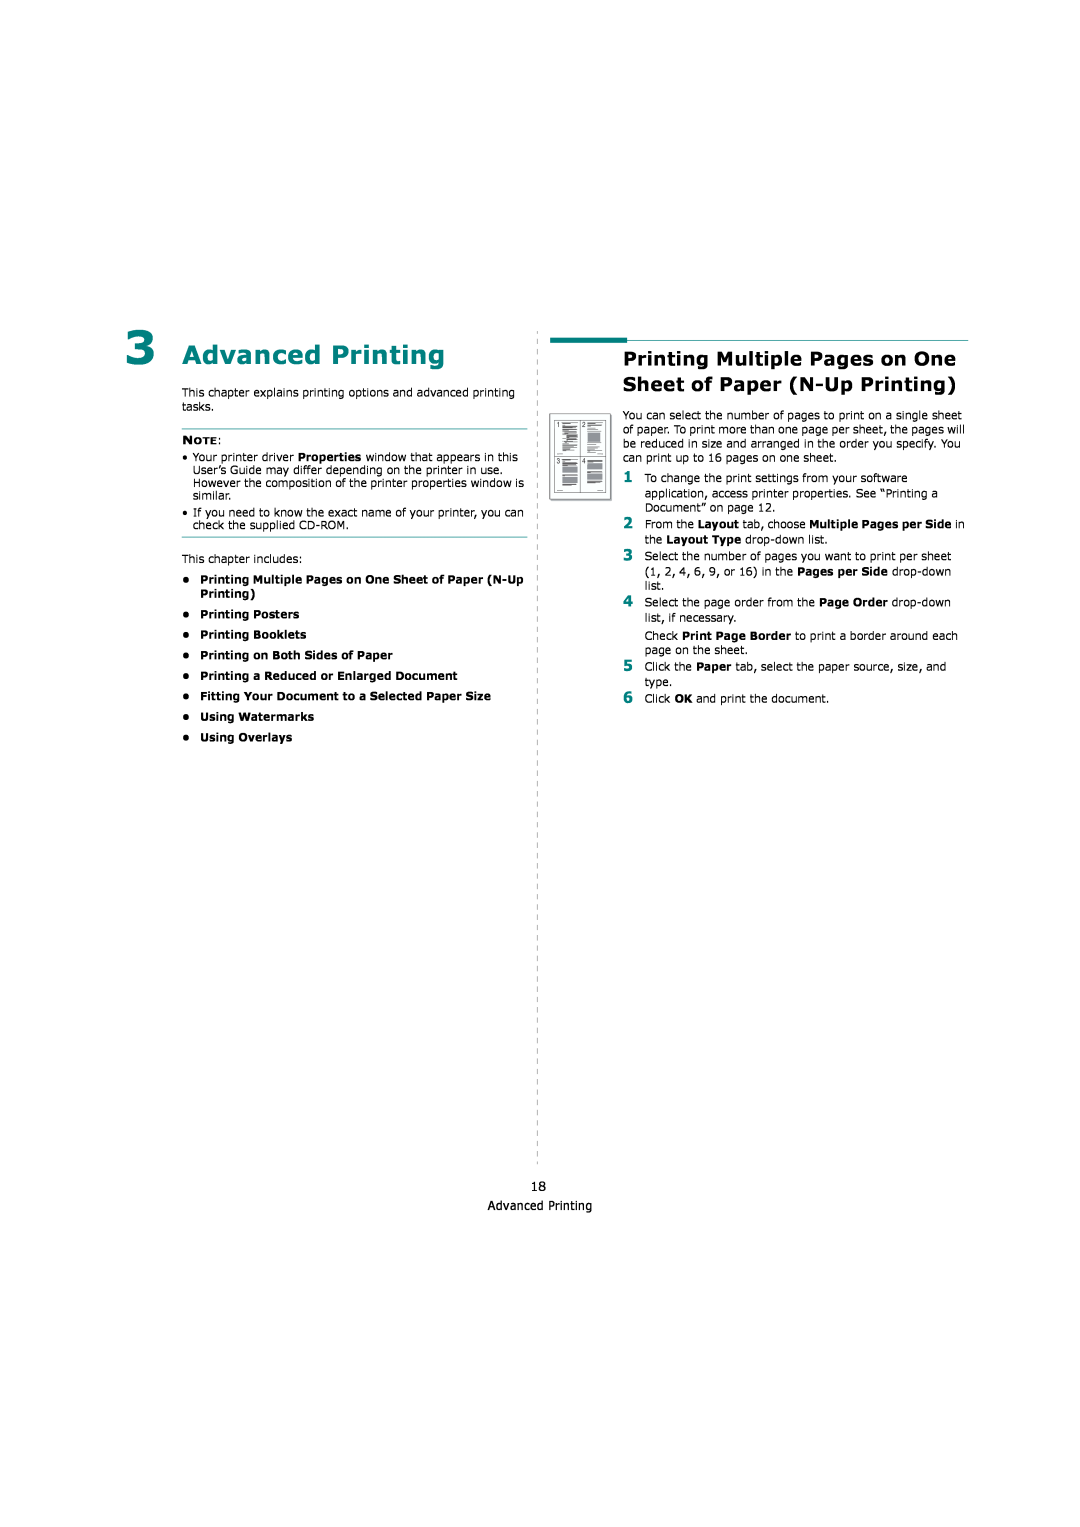 Samsung ML-4550, ML-4551ND Advanced Printing, Printing Multiple Pages on One Sheet of Paper N-Up Printing, Using Overlays 